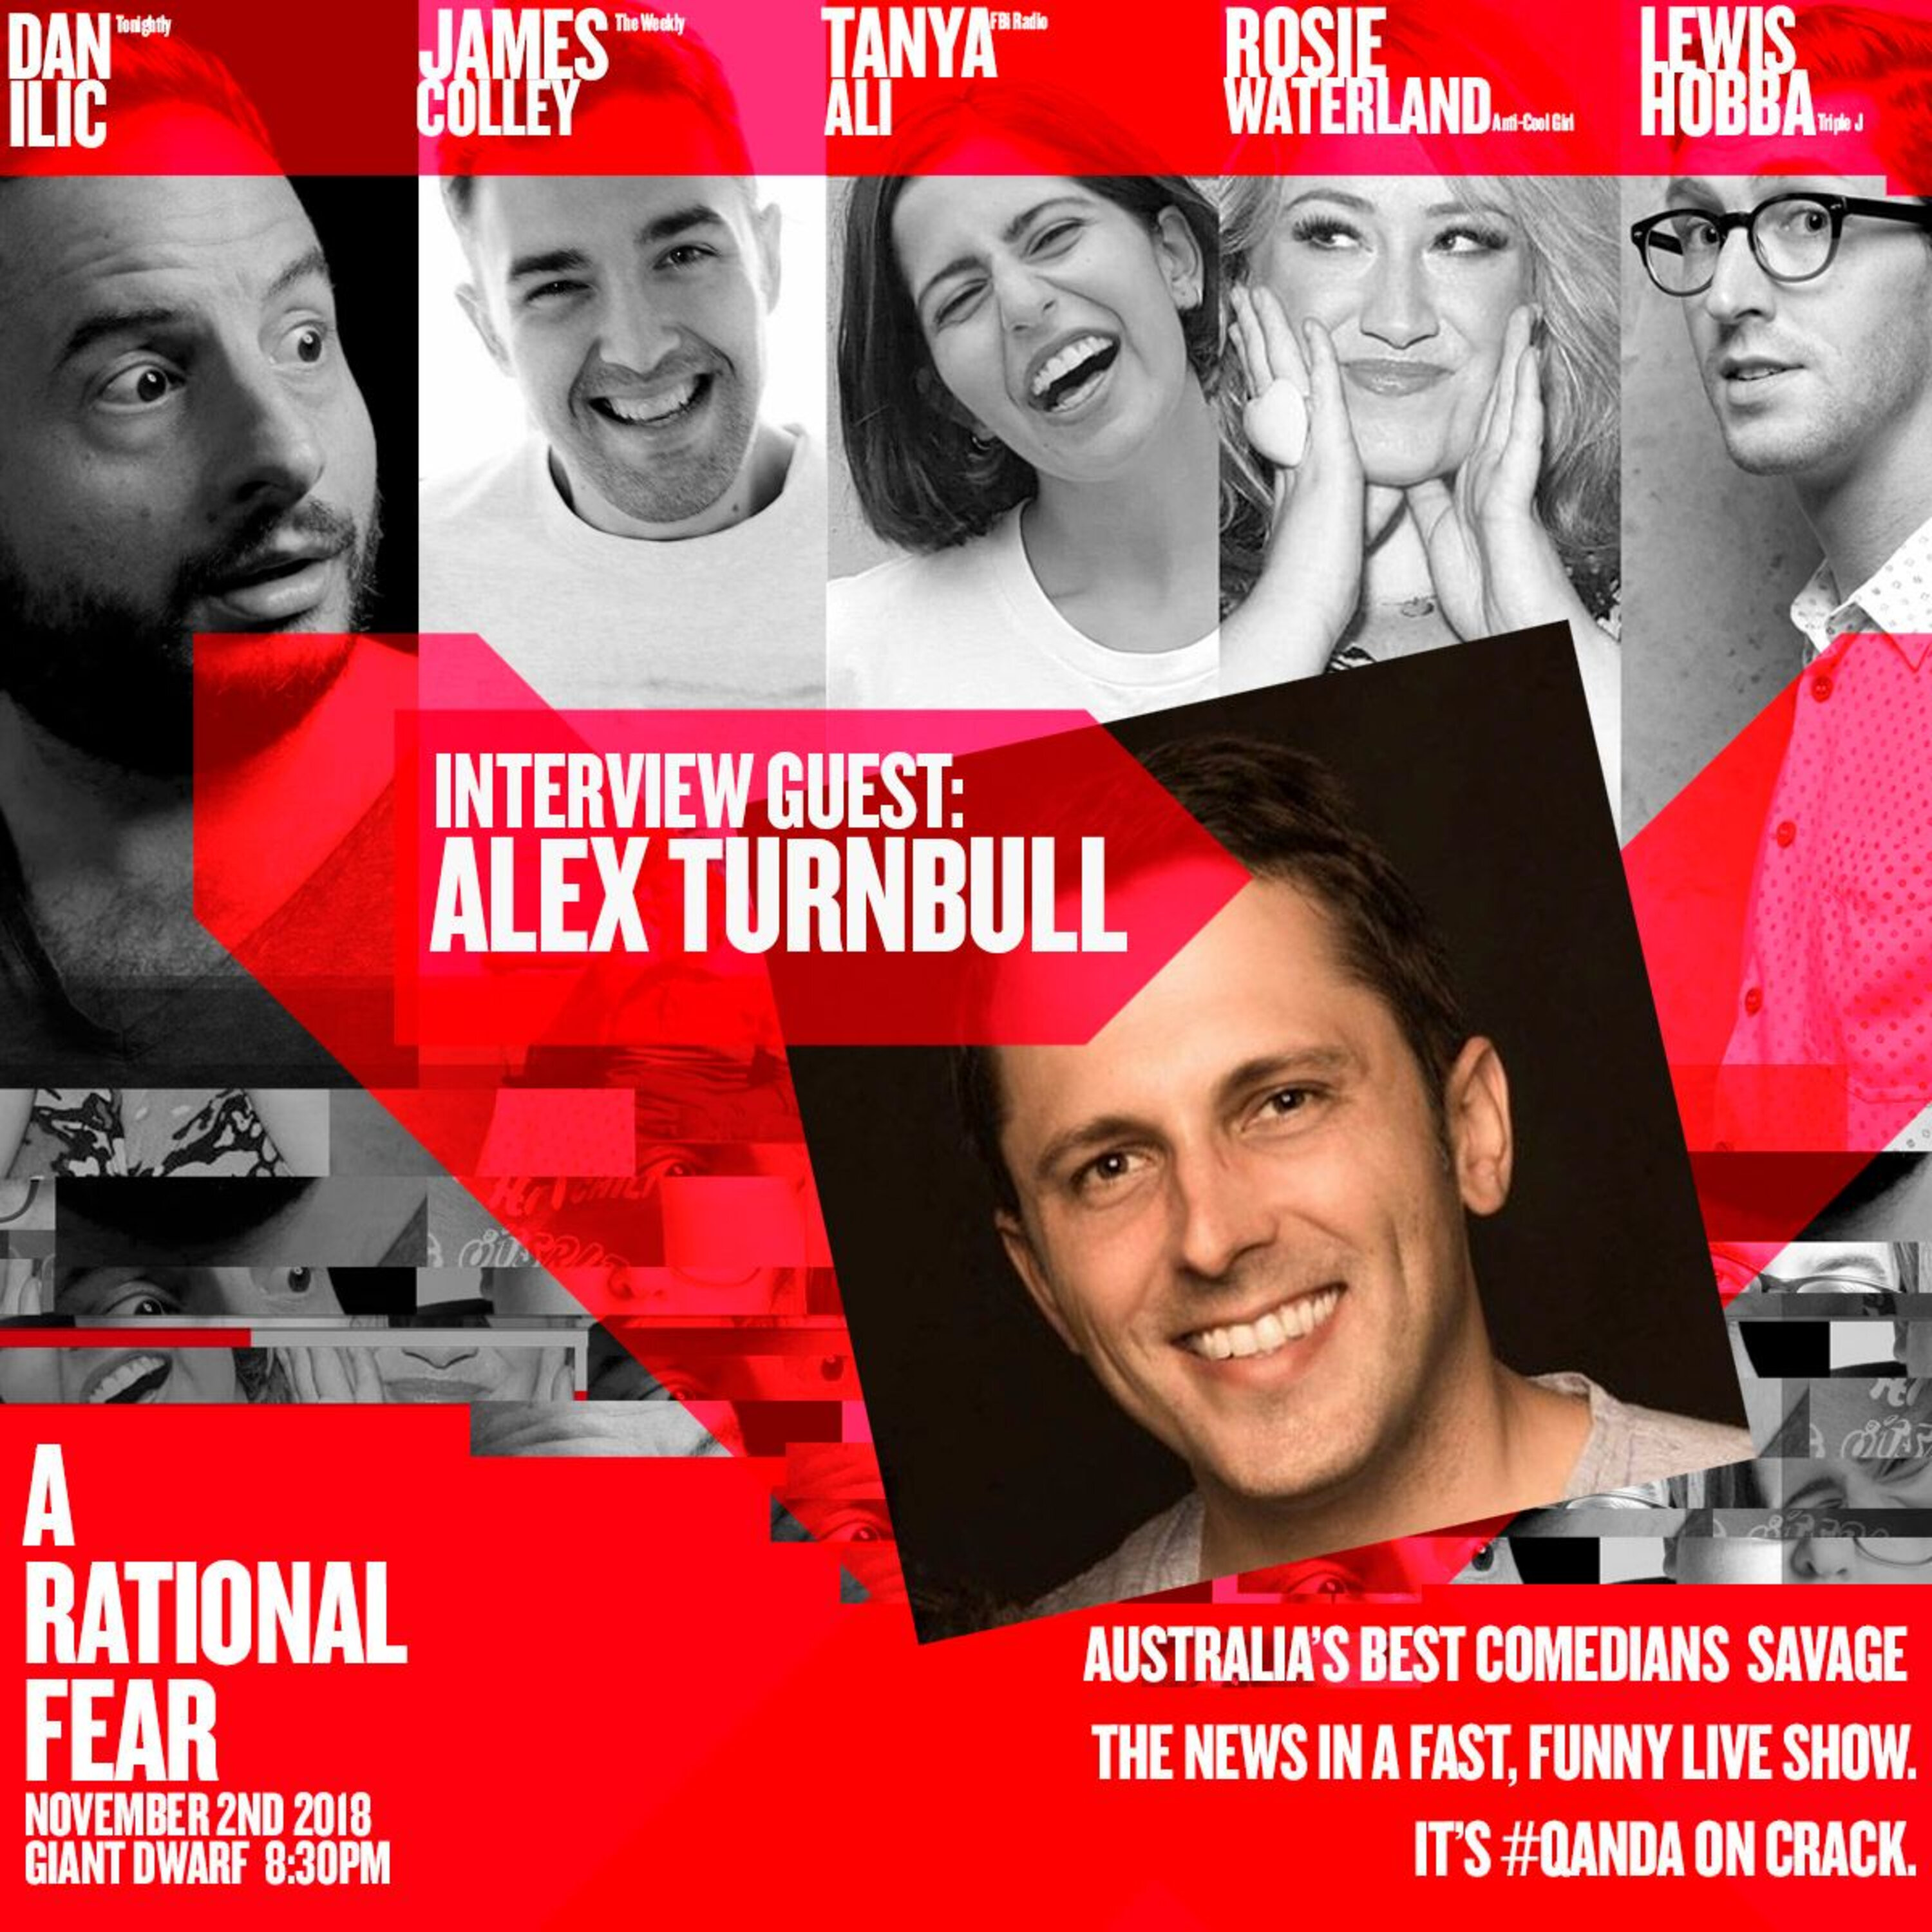 YACK FEST SPECIAL: Alex Turnbull Gets Grilled By A Rational Fear